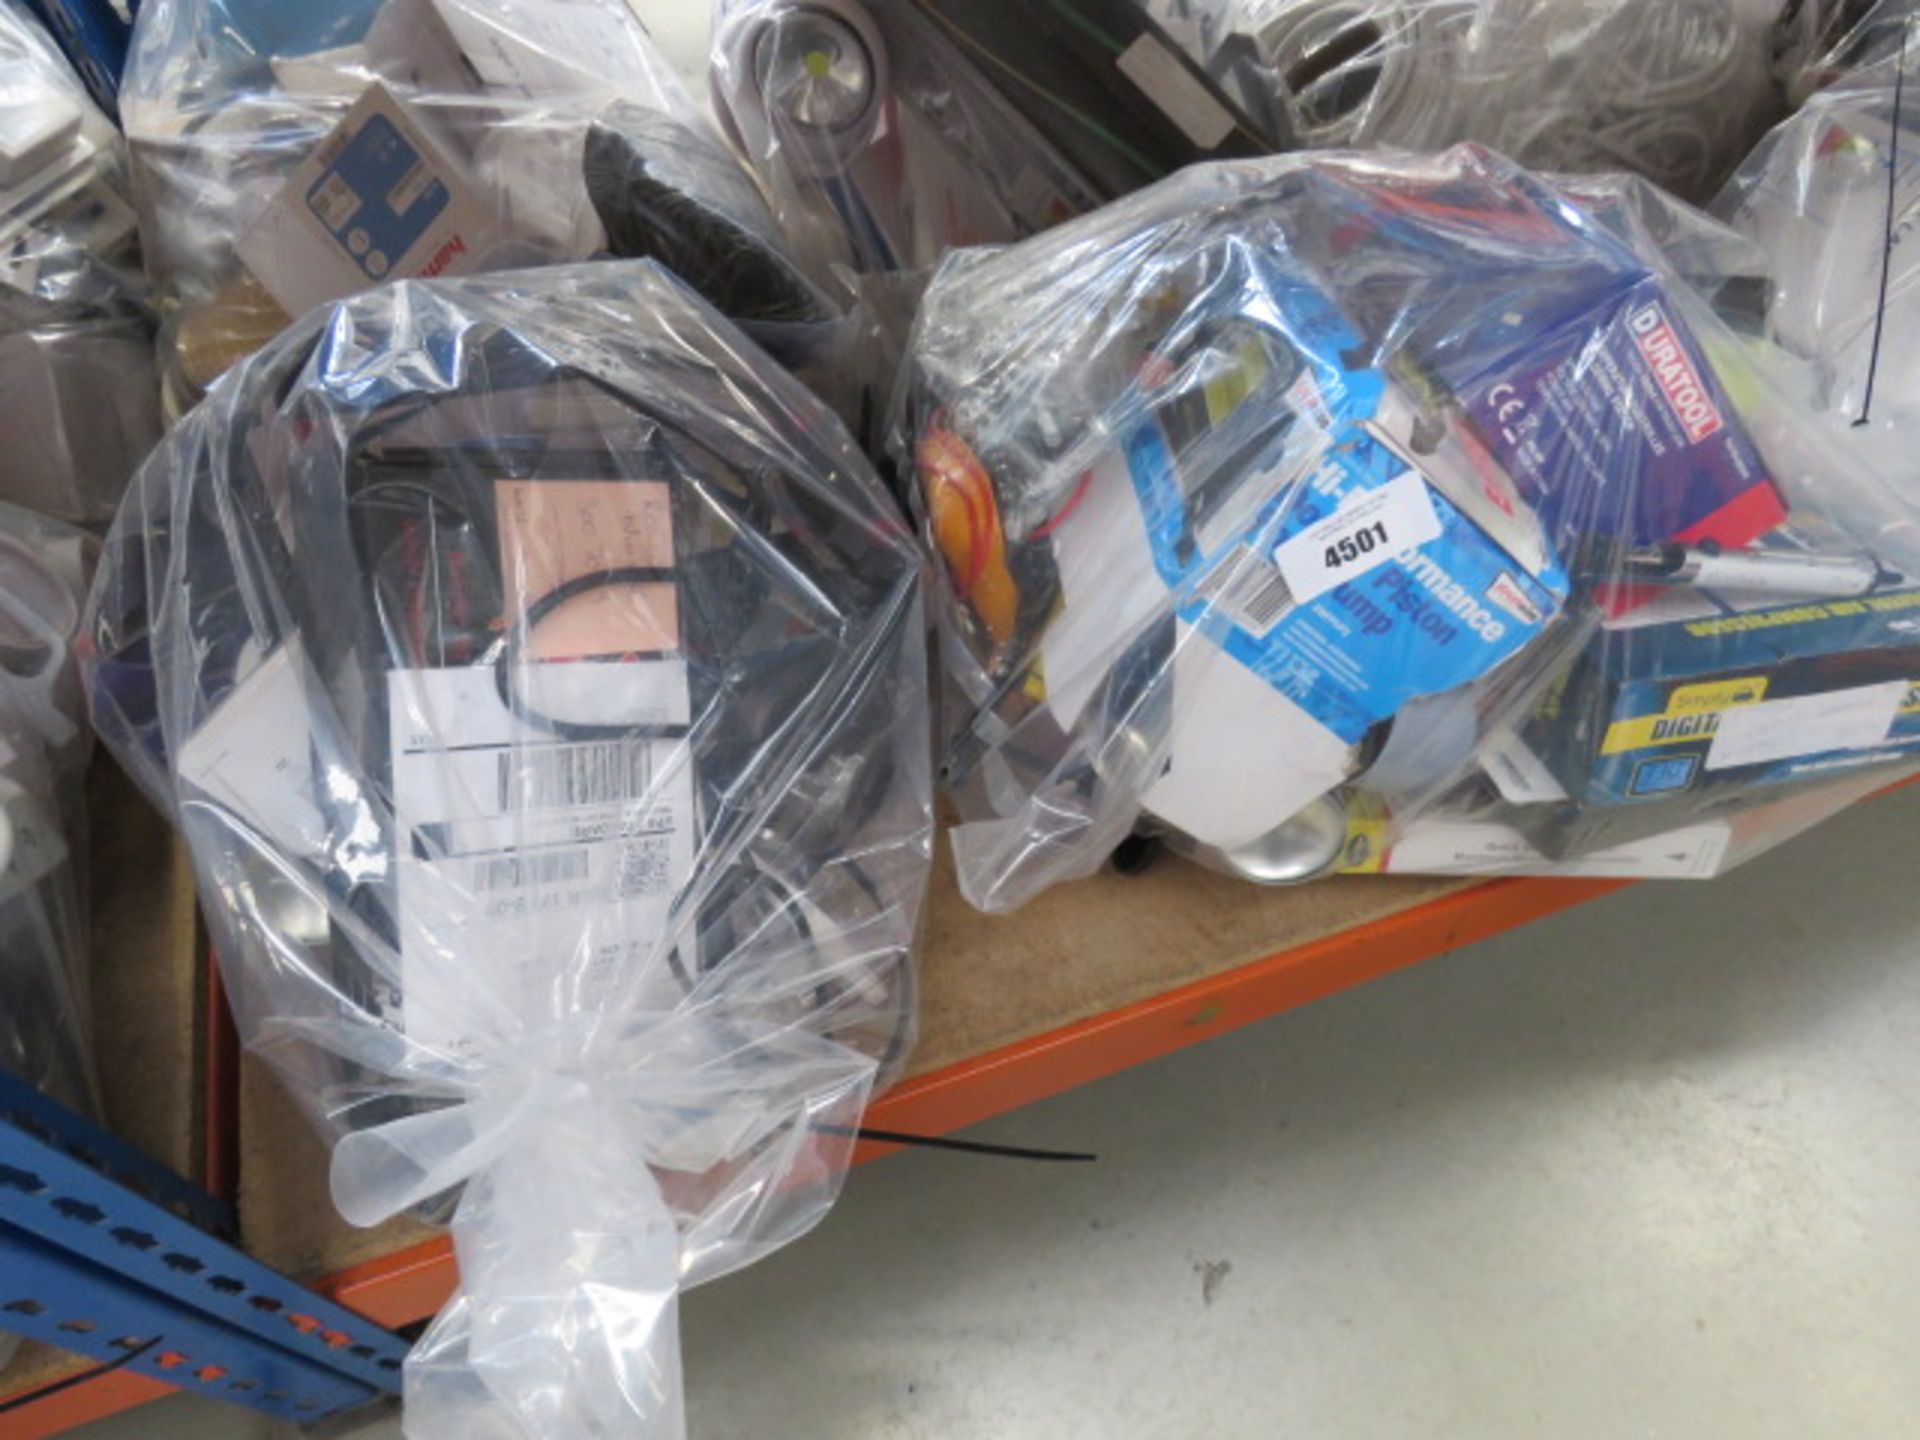 2 bags containing door piston pump, soldering stations, air compressors, cables, extension leads,